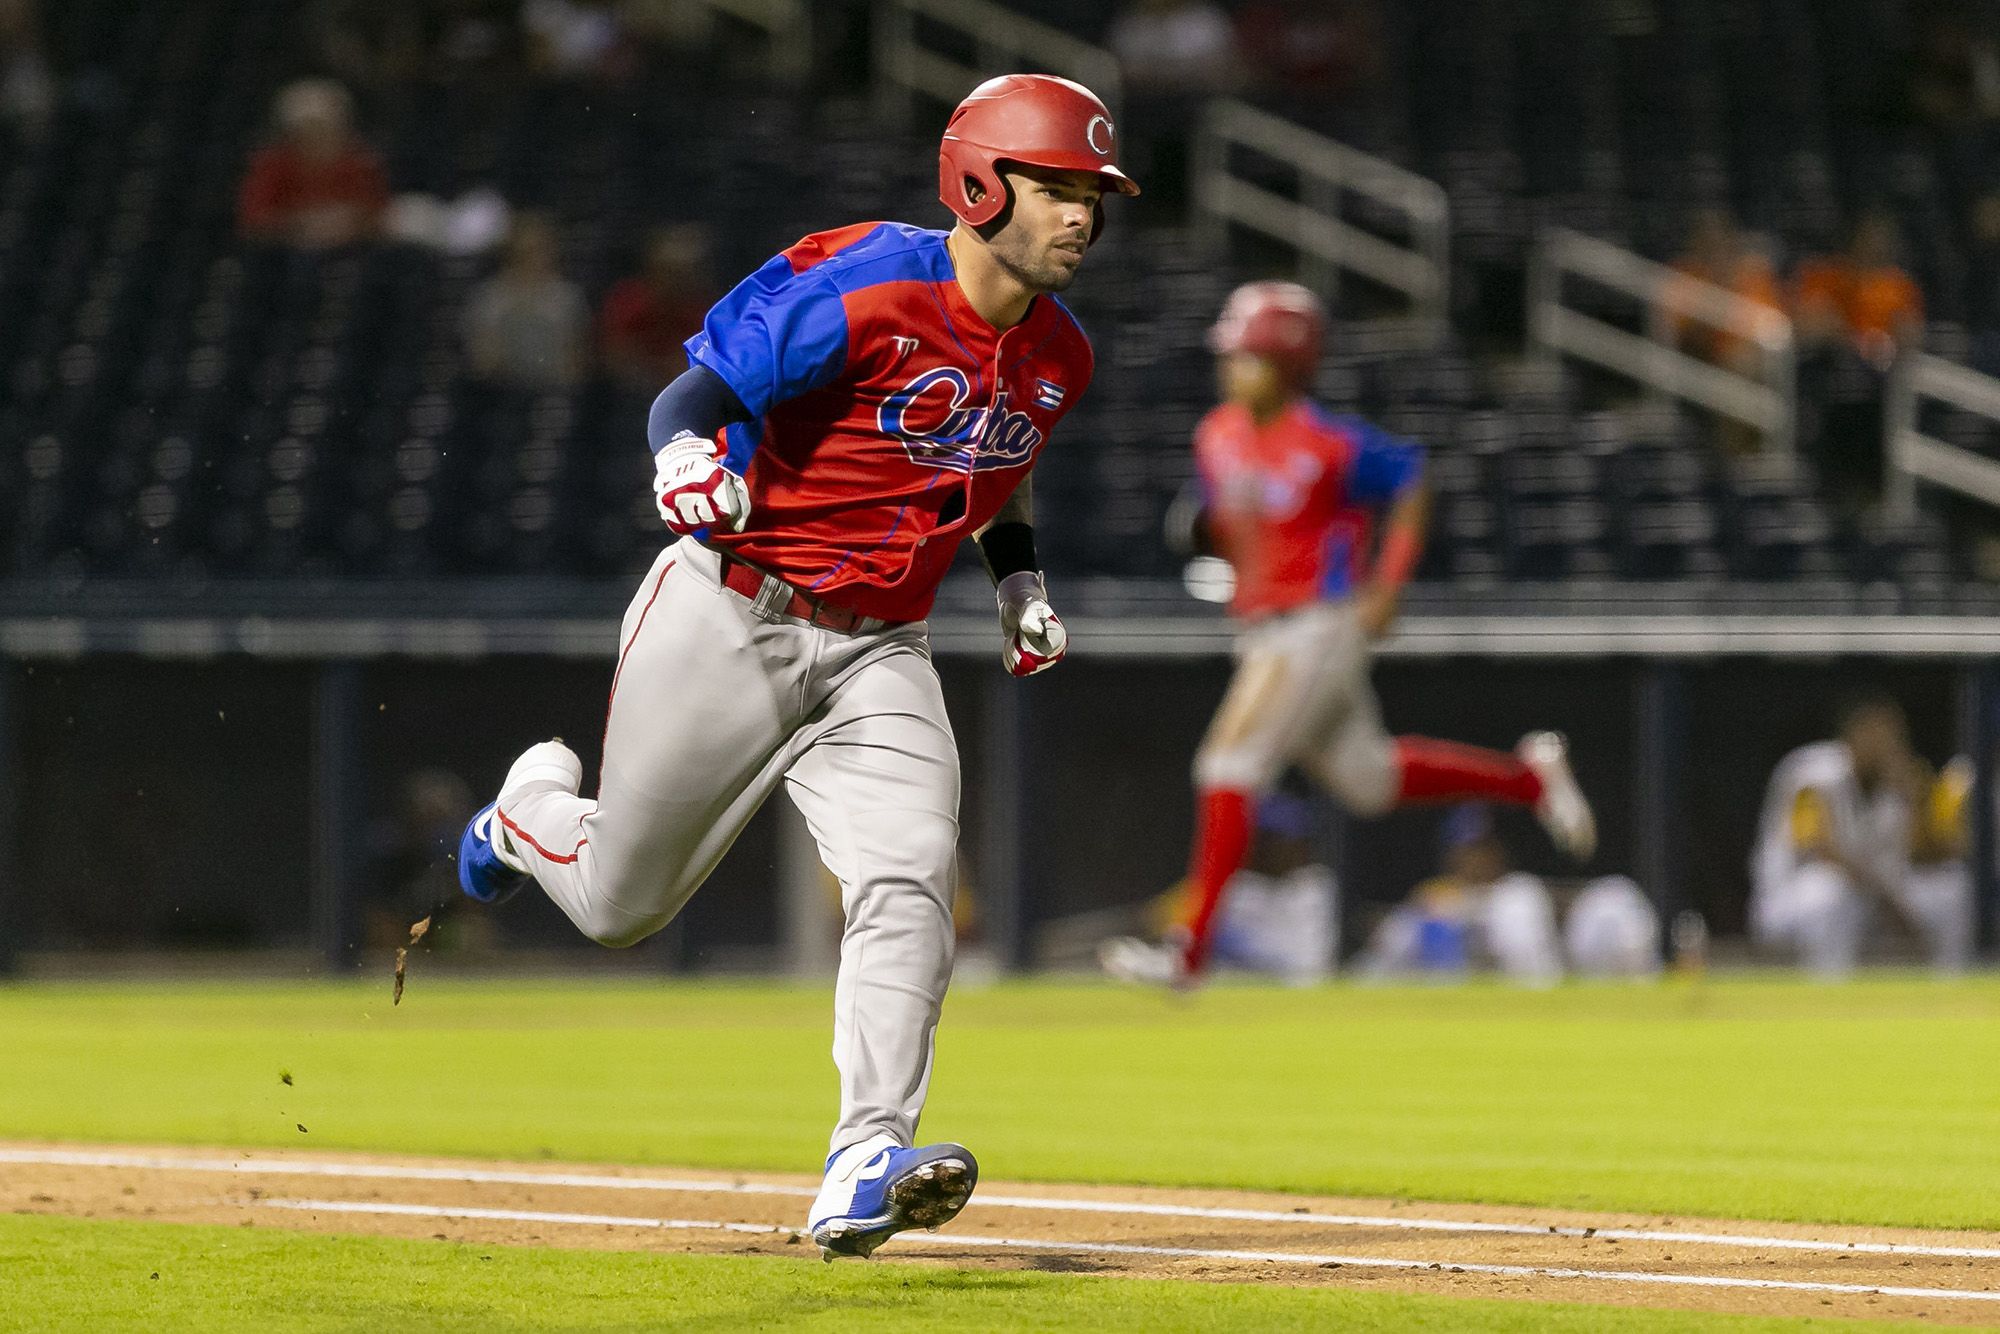 Cuban catcher defects after World Baseball Classic, report says